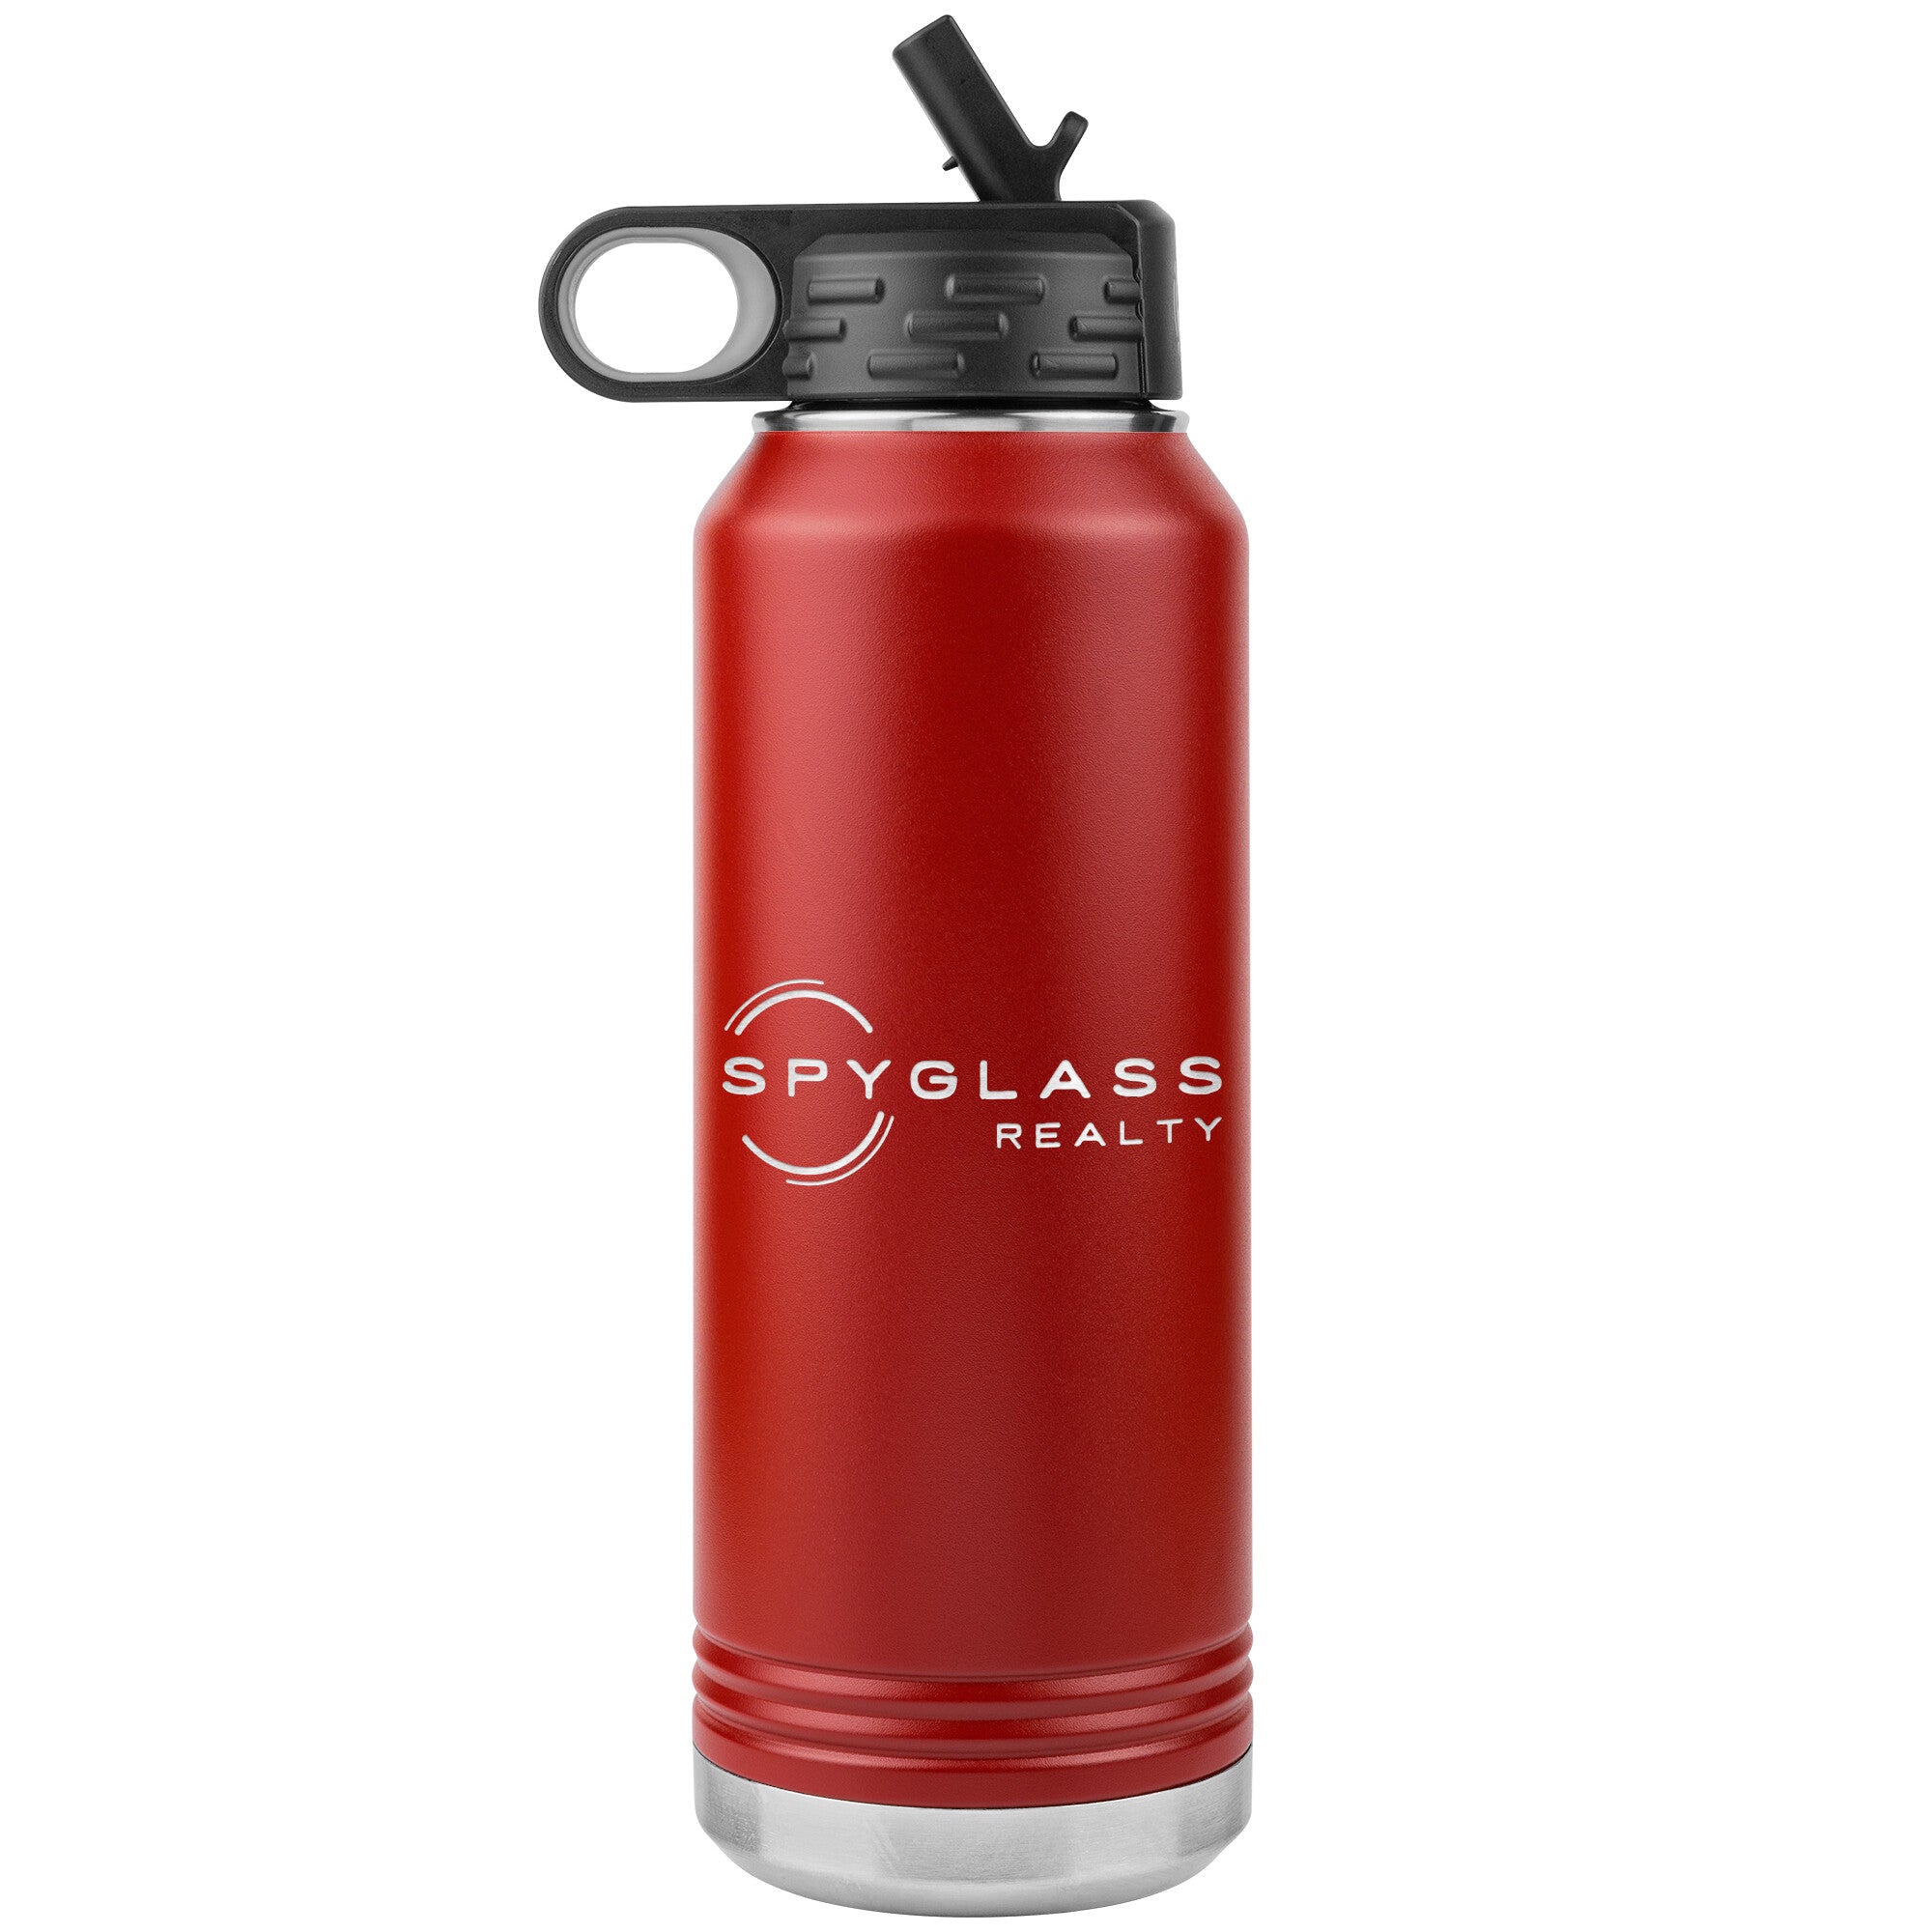 32oz Spyglass Realty Water Bottle Insulated